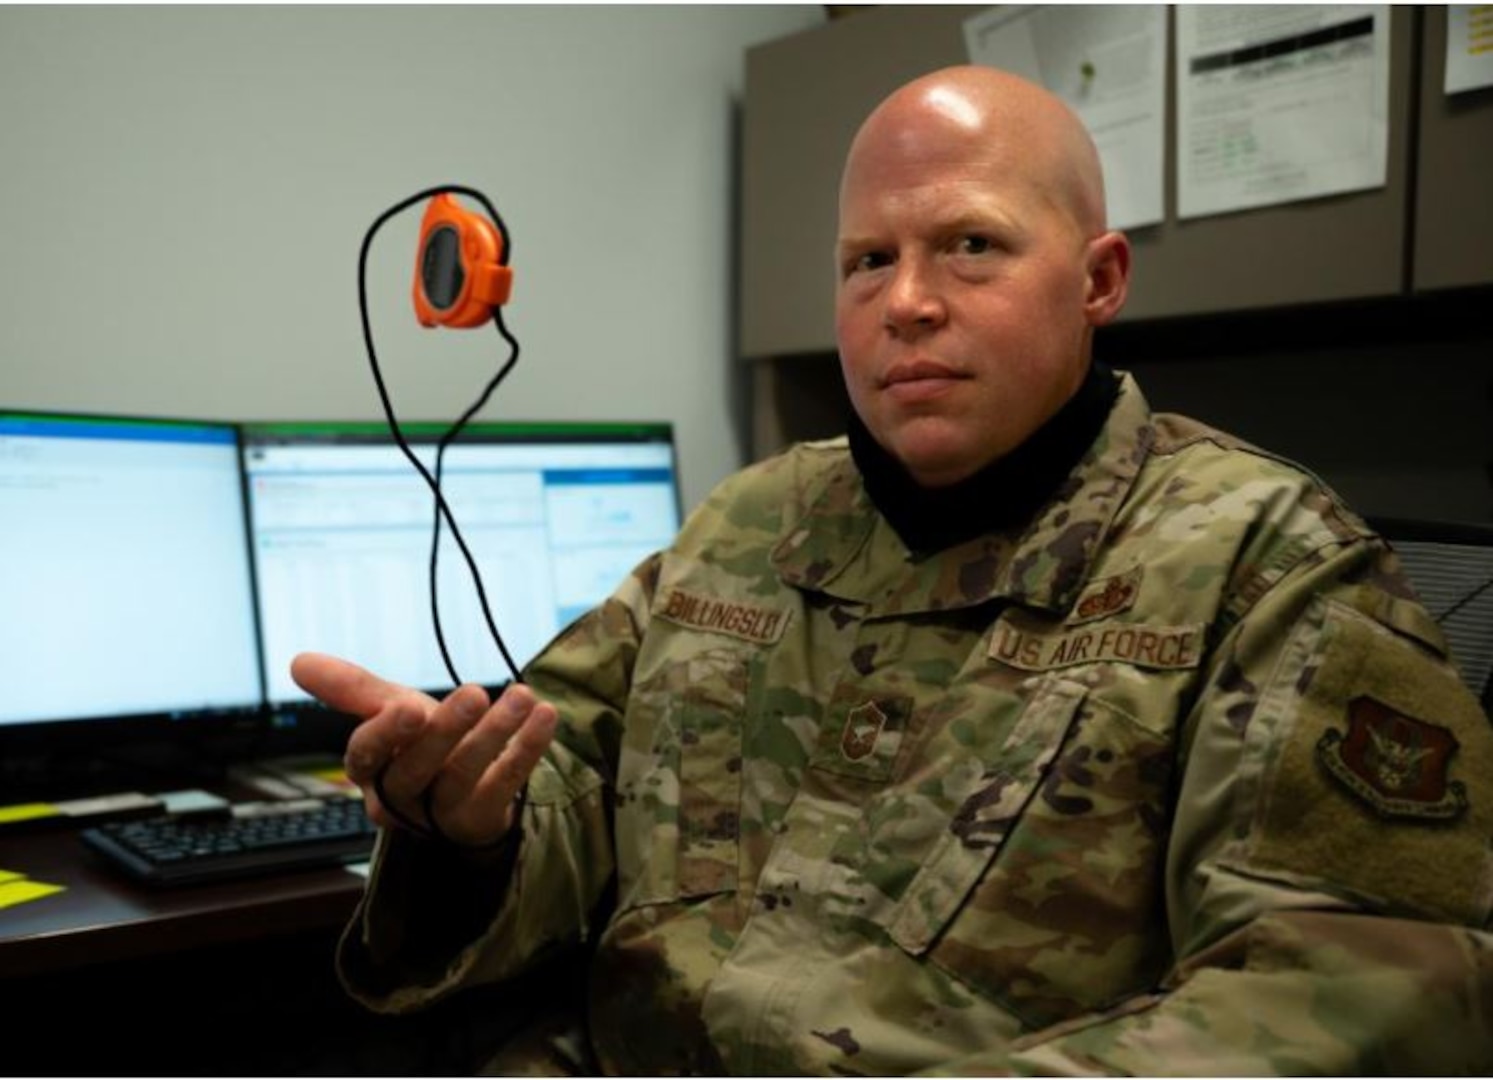 U.S. Air Force Senior Master Sgt. Jason Billingsley, the superintendent for the 442d Sustainment Services Flight, is photographed with a stopwatch Oct. 3, 2021 on Whiteman Air Force Base, Mo. Billingsley led a virtual training about the new myFitness platform used by fitness program managers to schedule tests, run reports, and keep track of results and exemptions. (U.S. Air Force photo by Tech. Sgt. Missy Sterling)